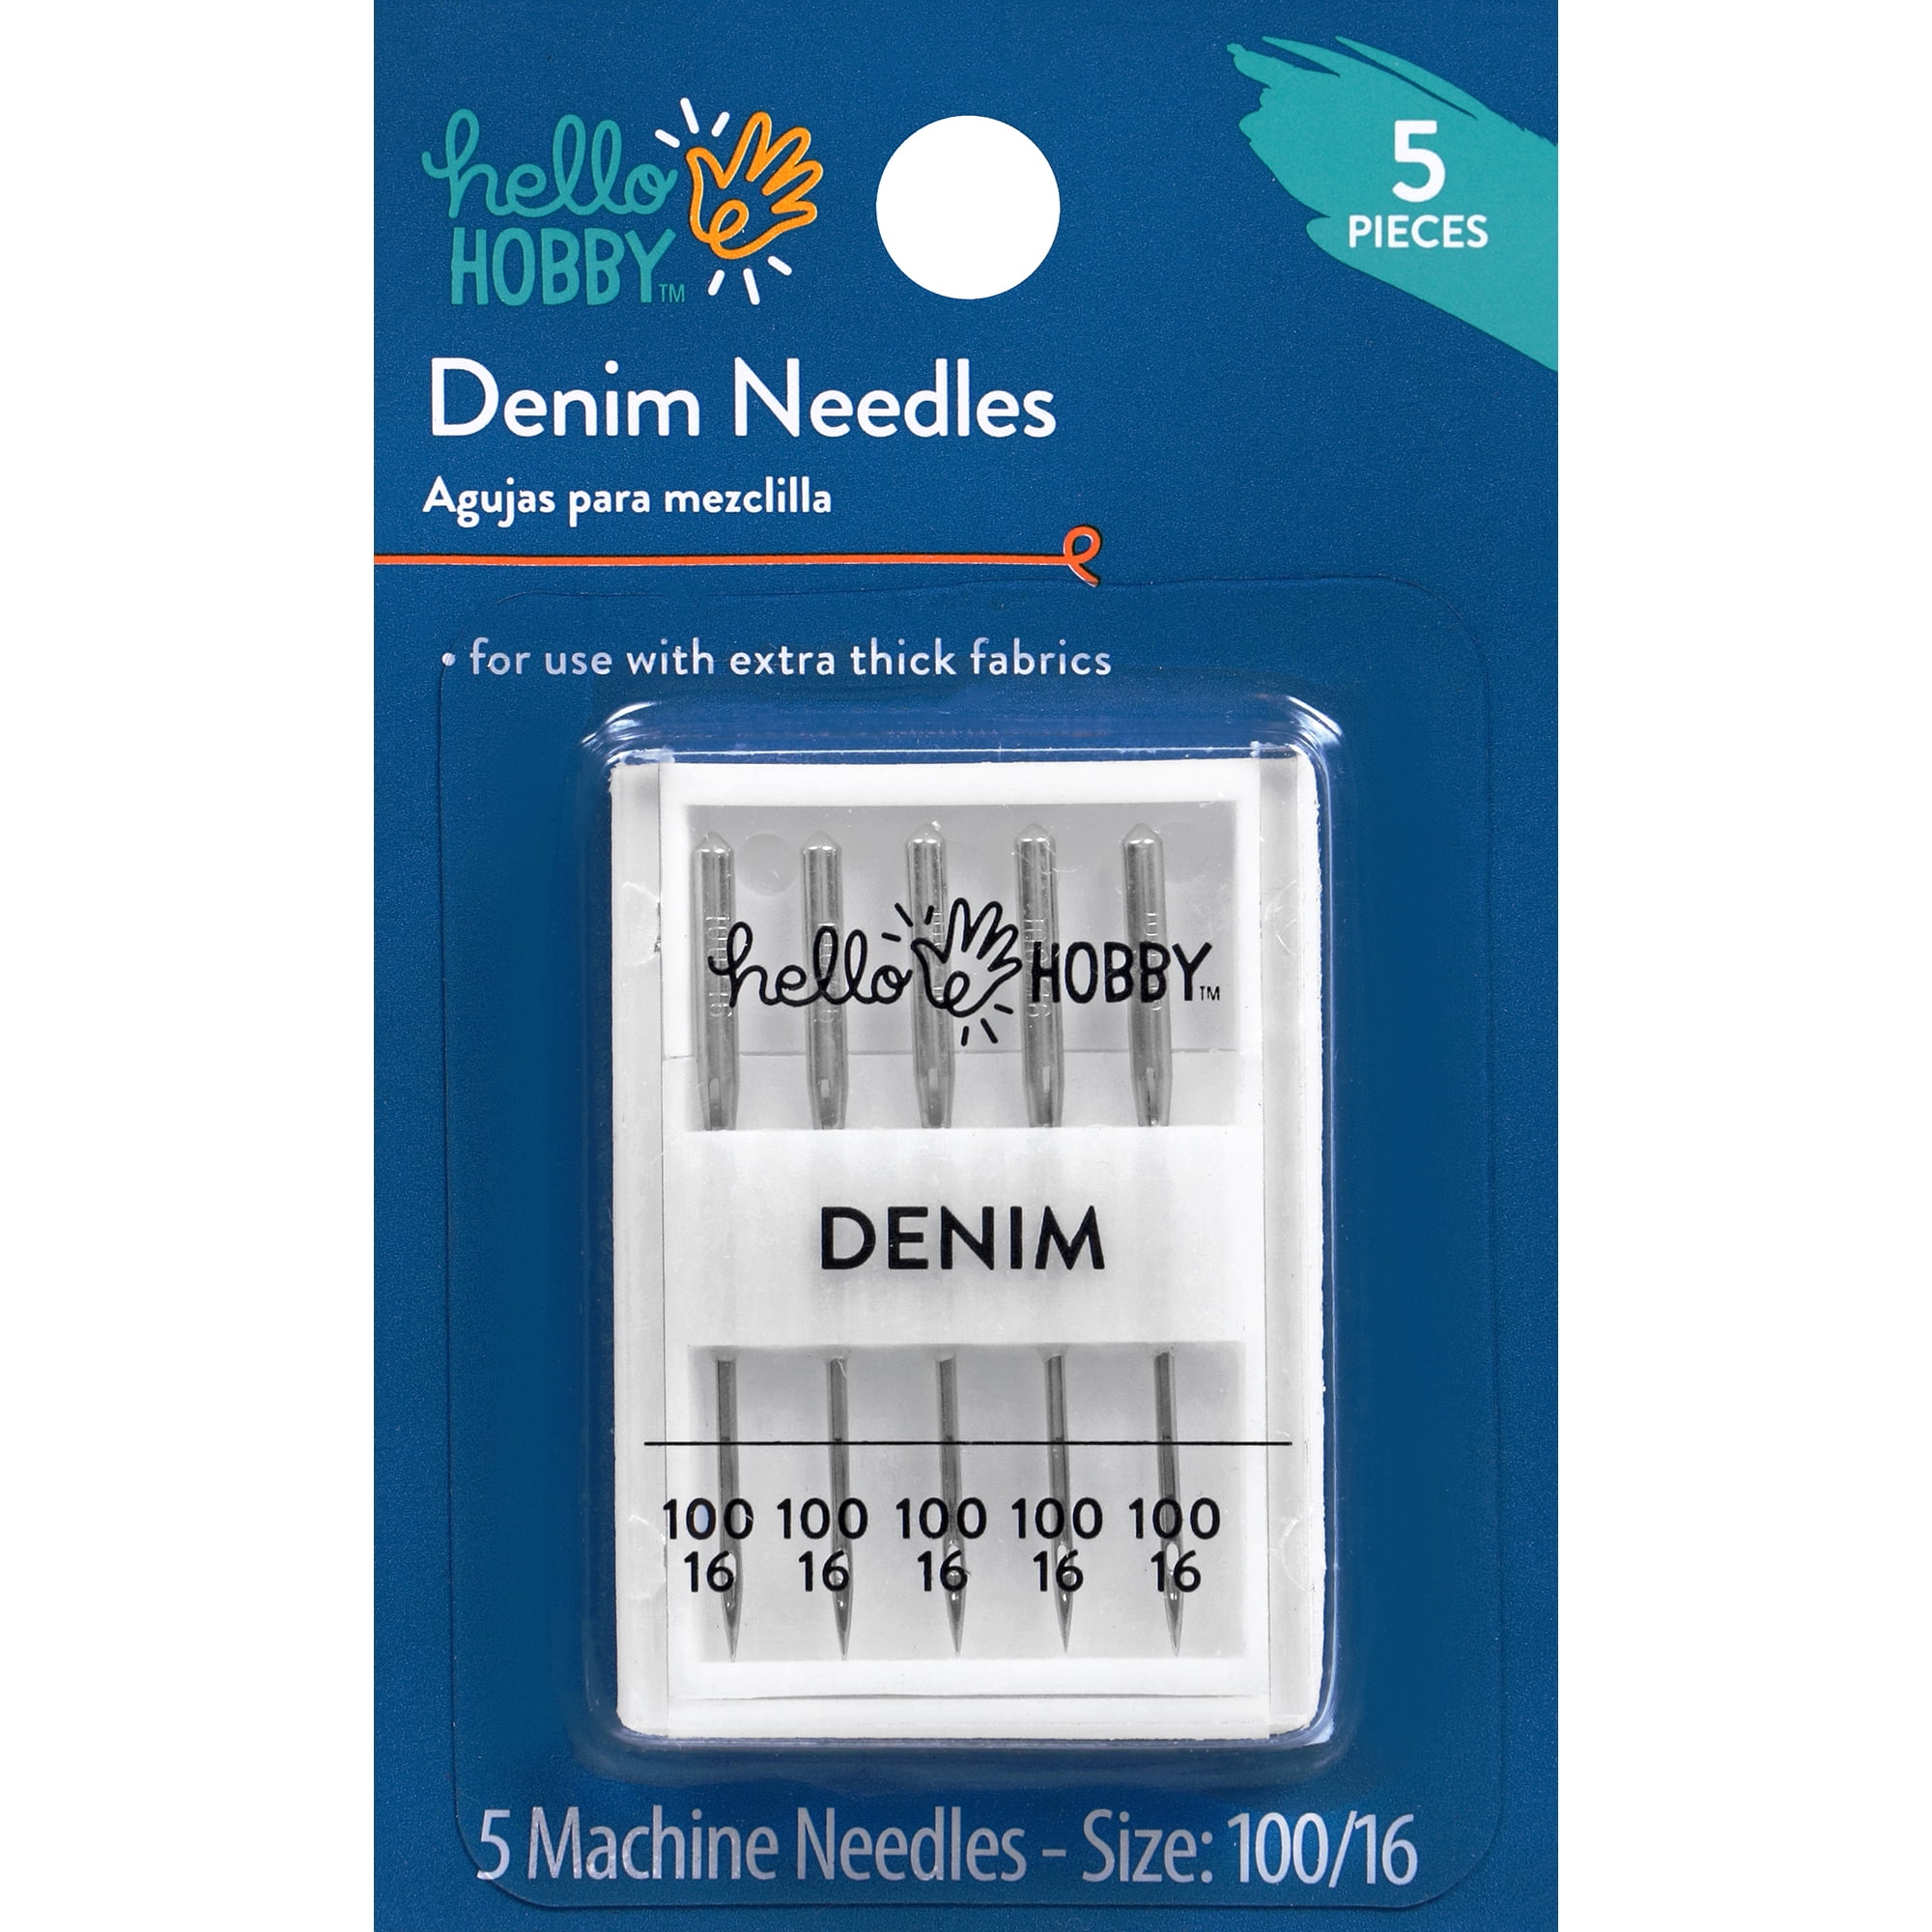  SCHMETZ Needles (Size 16/100) - 5 per package : Arts, Crafts &  Sewing